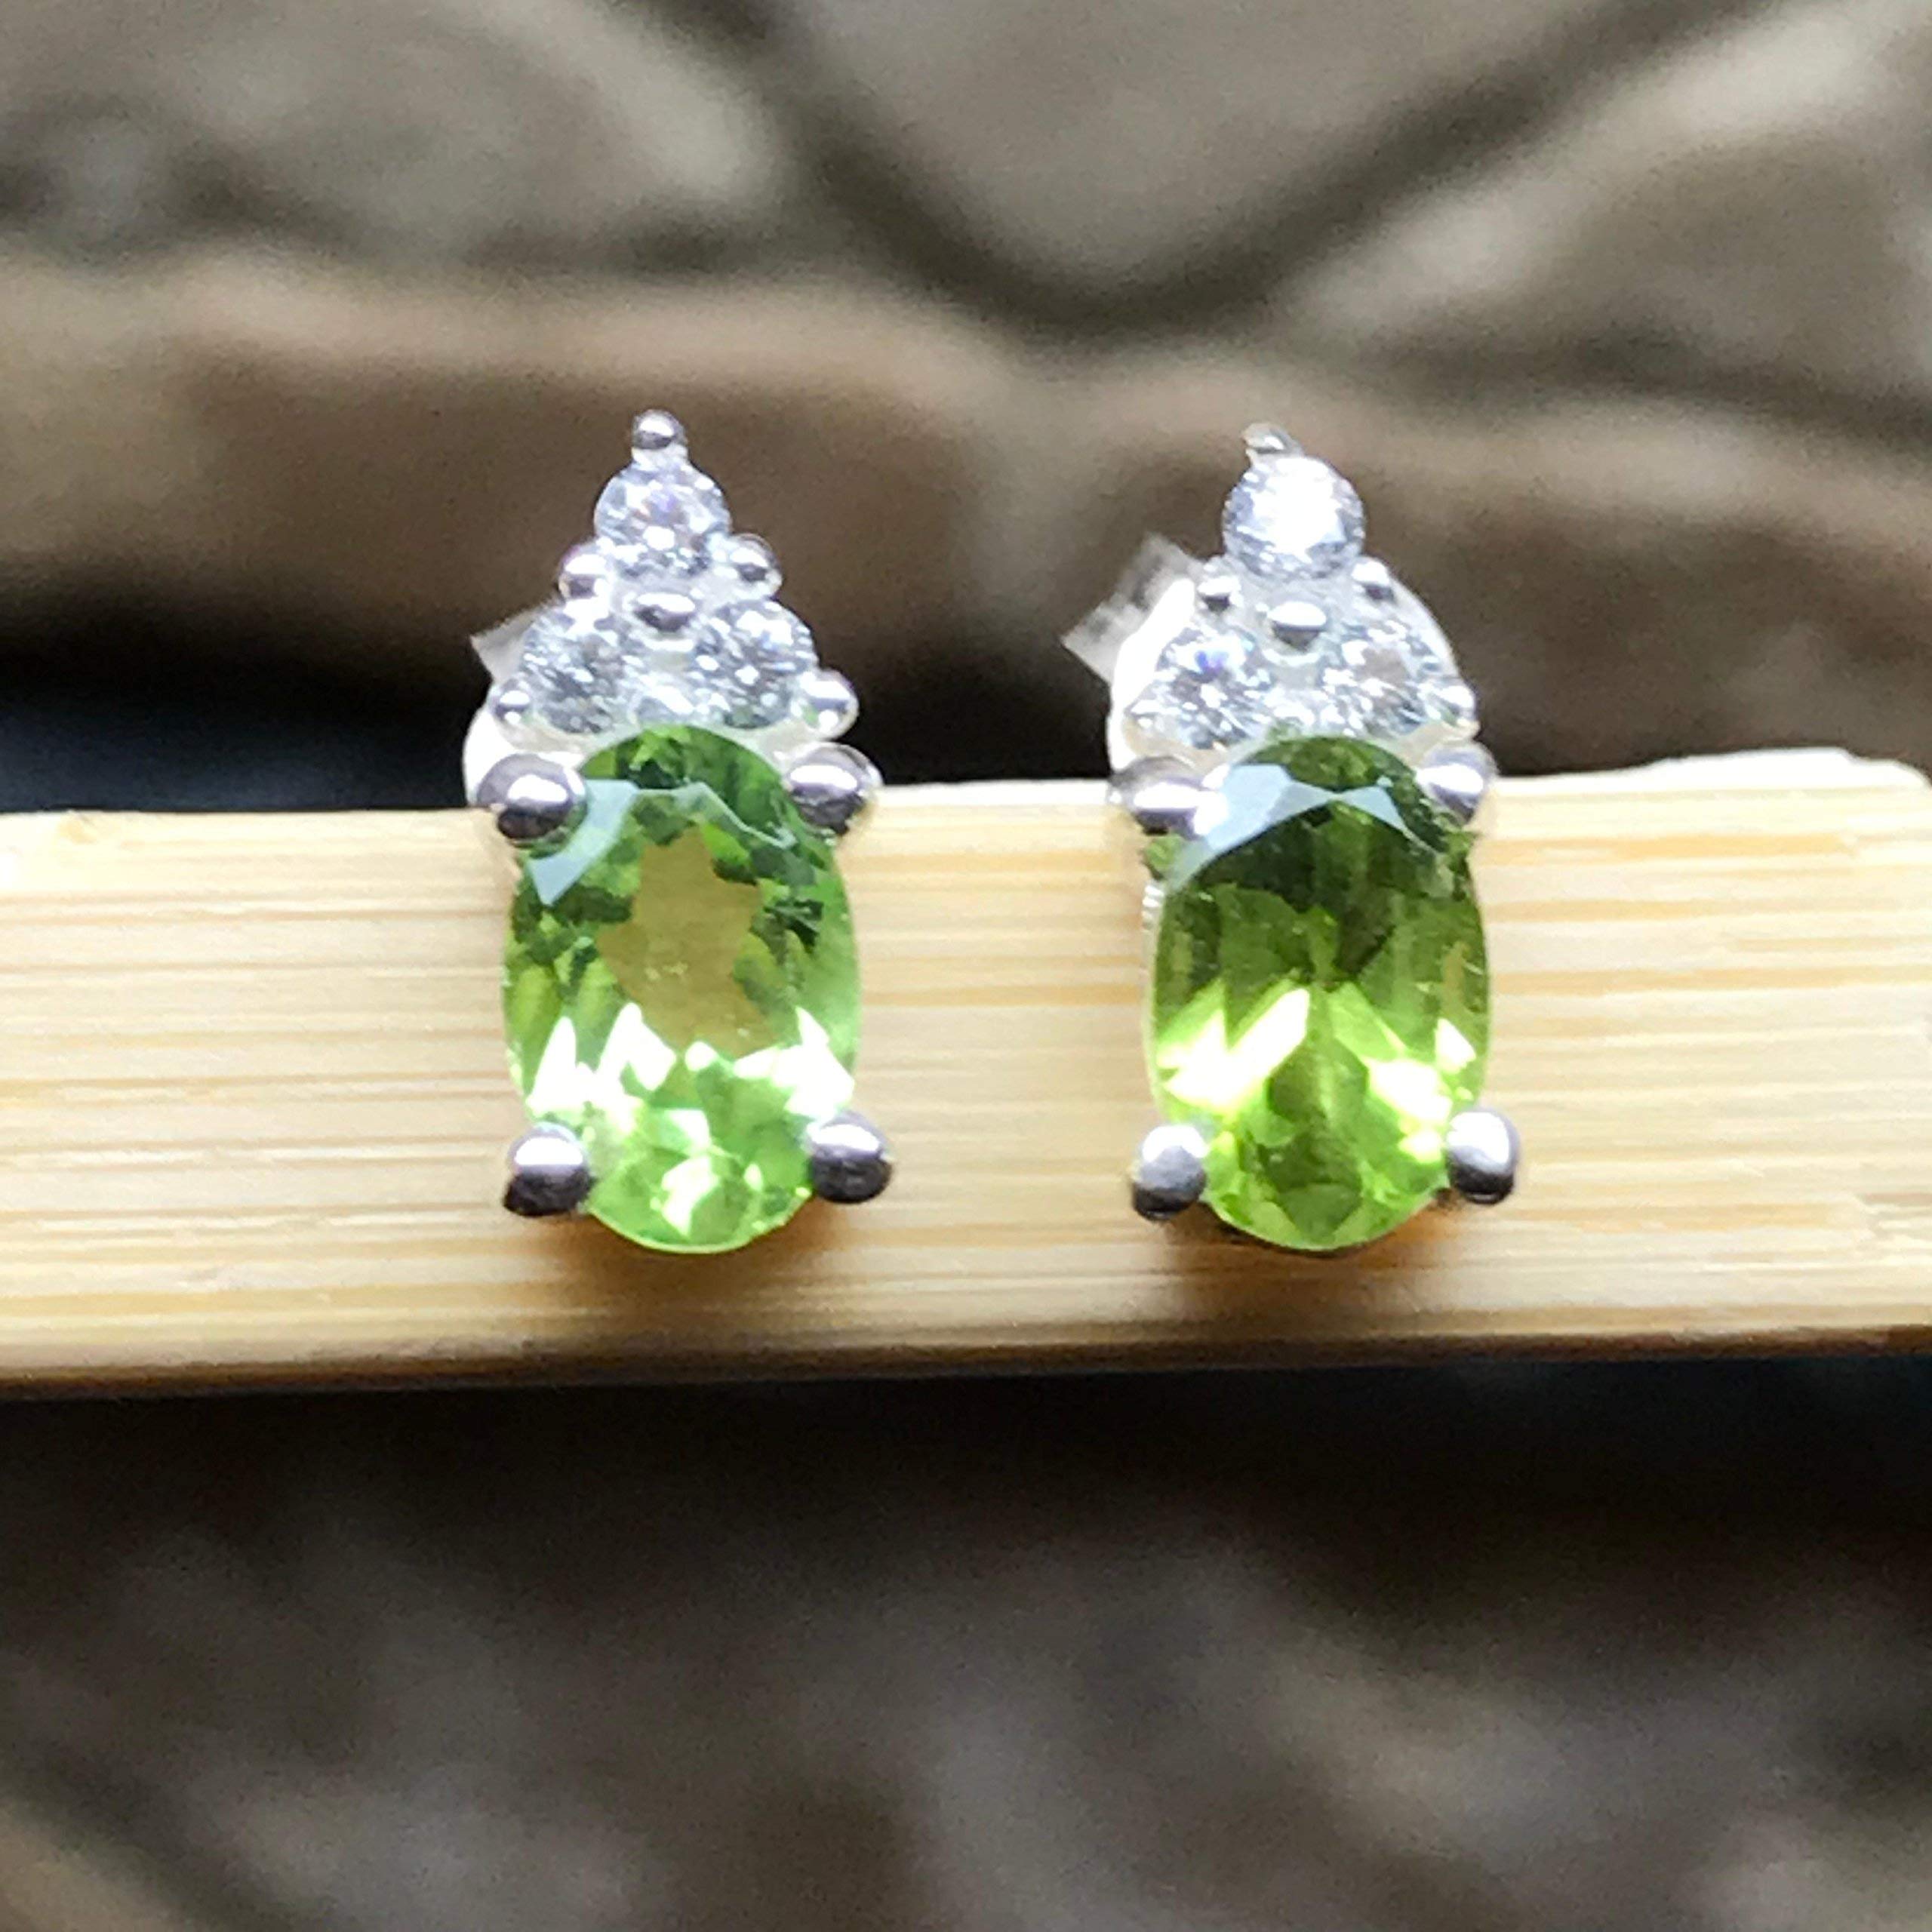 Natural 1.5ct Apple Green Peridot 925 Solid Sterling Silver Earrings 10mm - Natural Rocks by Kala